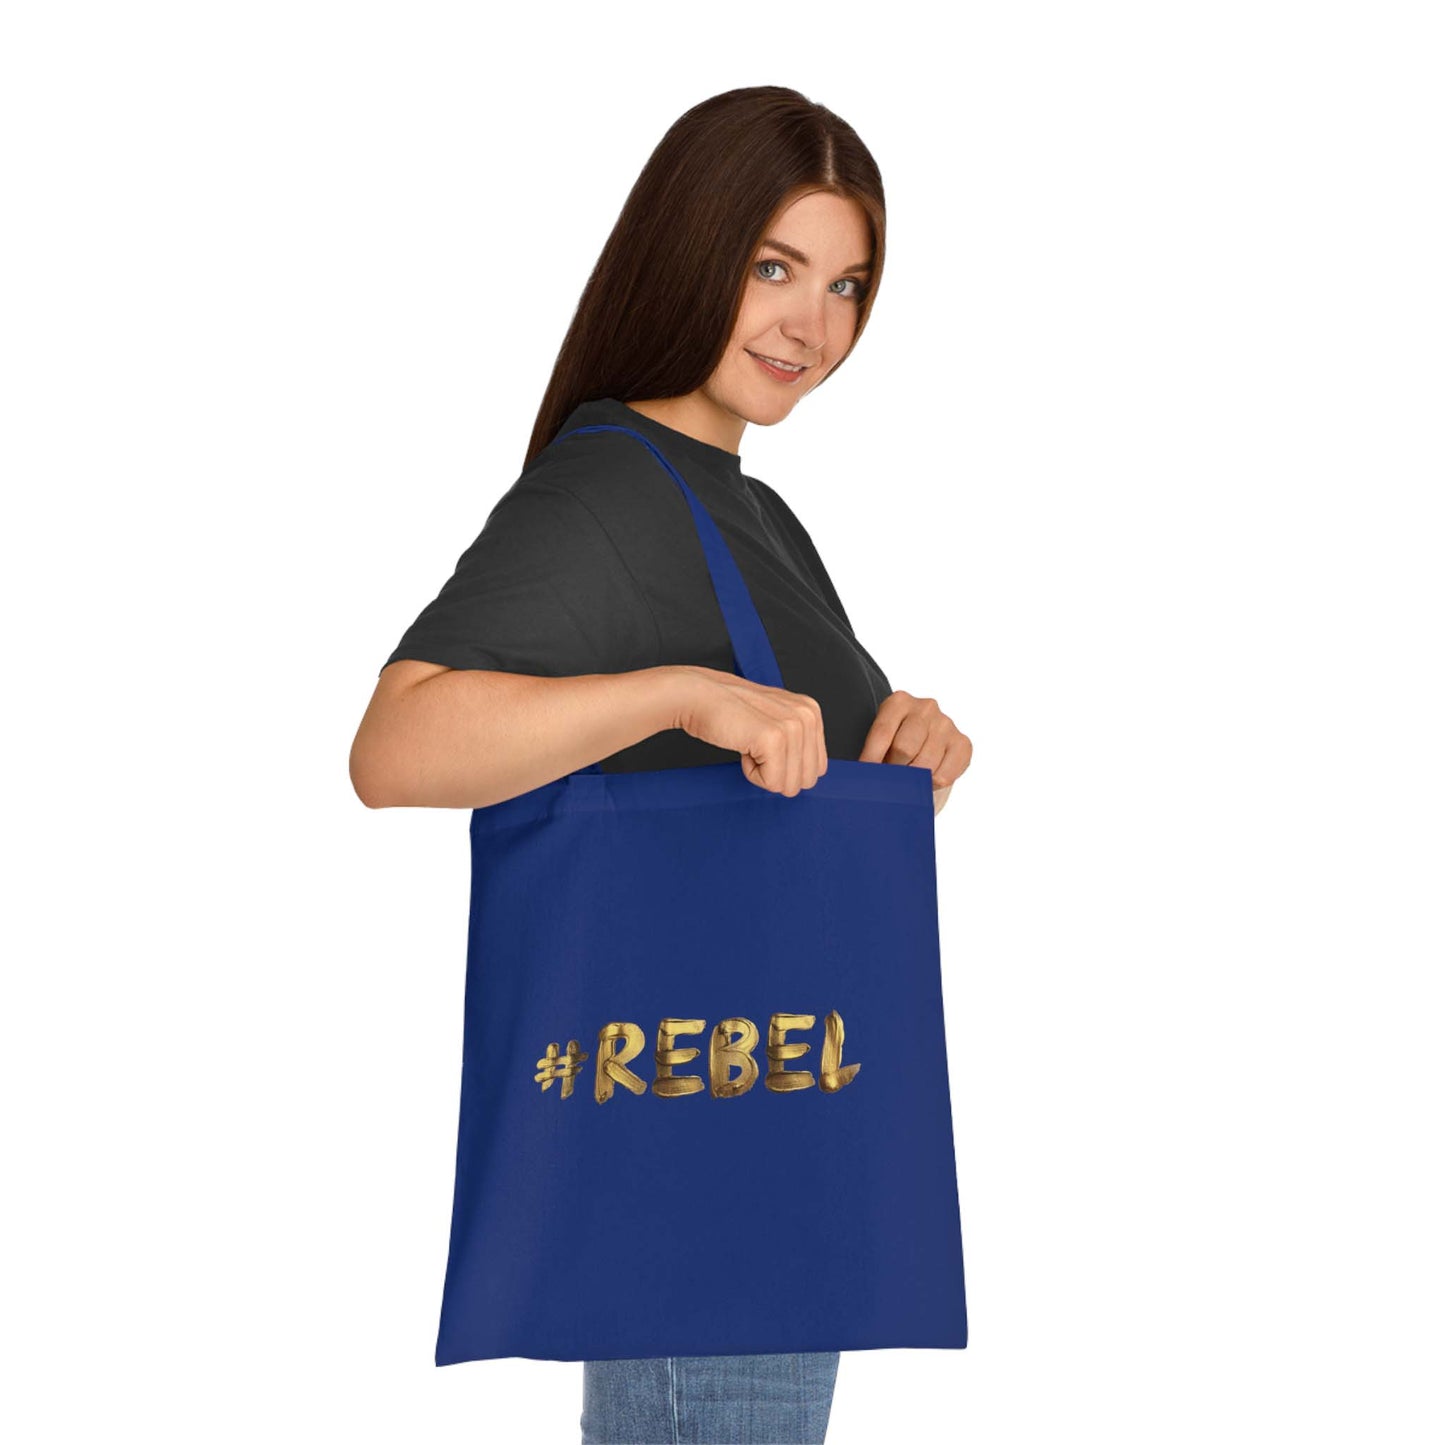 Navy blue shopping bag with #REBEL meme! Only if you are a rebel you can use this as your shopping bag!